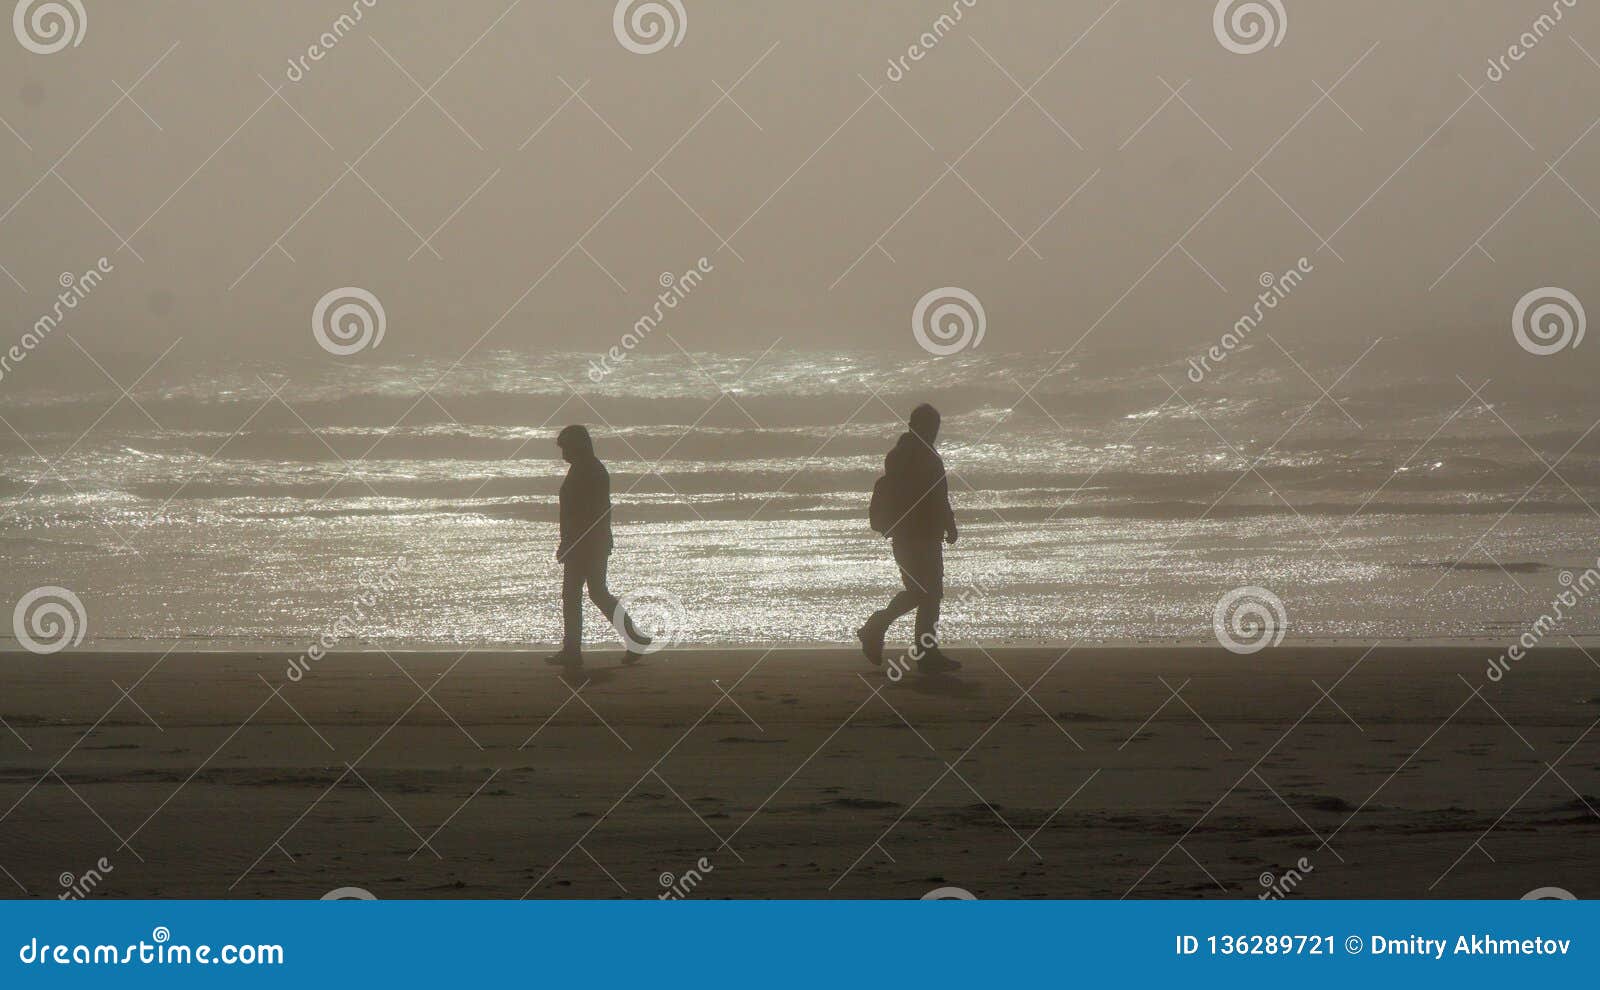 silhouettes of two persons walking in an opposite directions on a tillamook beach, oregon